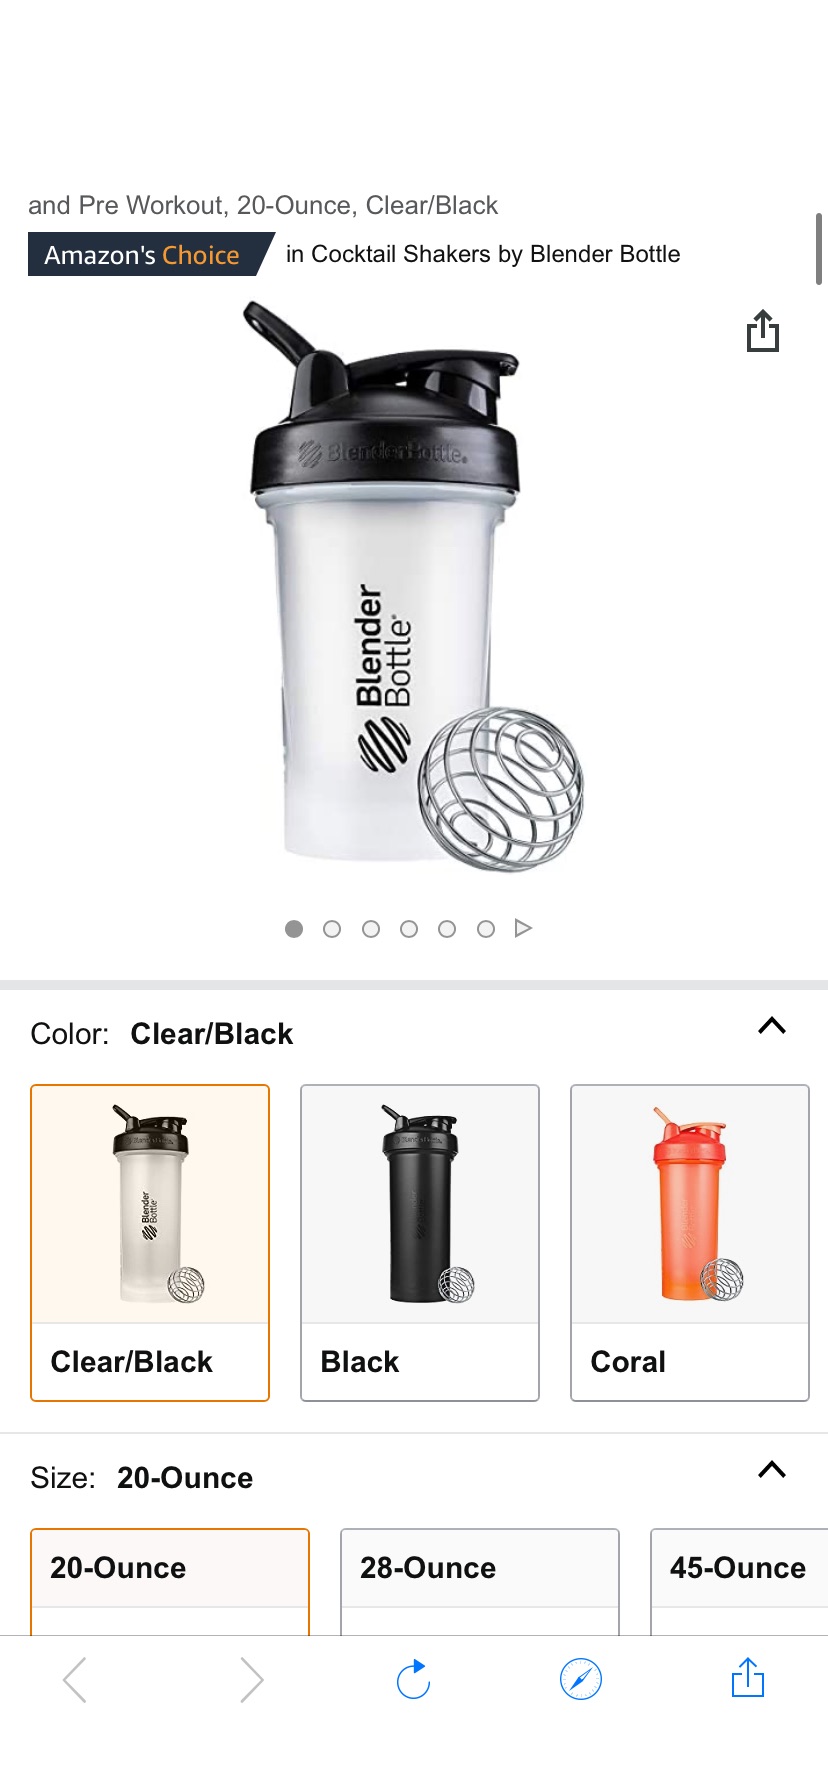 Amazon.com: BlenderBottle Classic V2 Shaker Bottle Perfect for Protein Shakes and Pre Workout, 20-Ounce, Clear/Black杯子